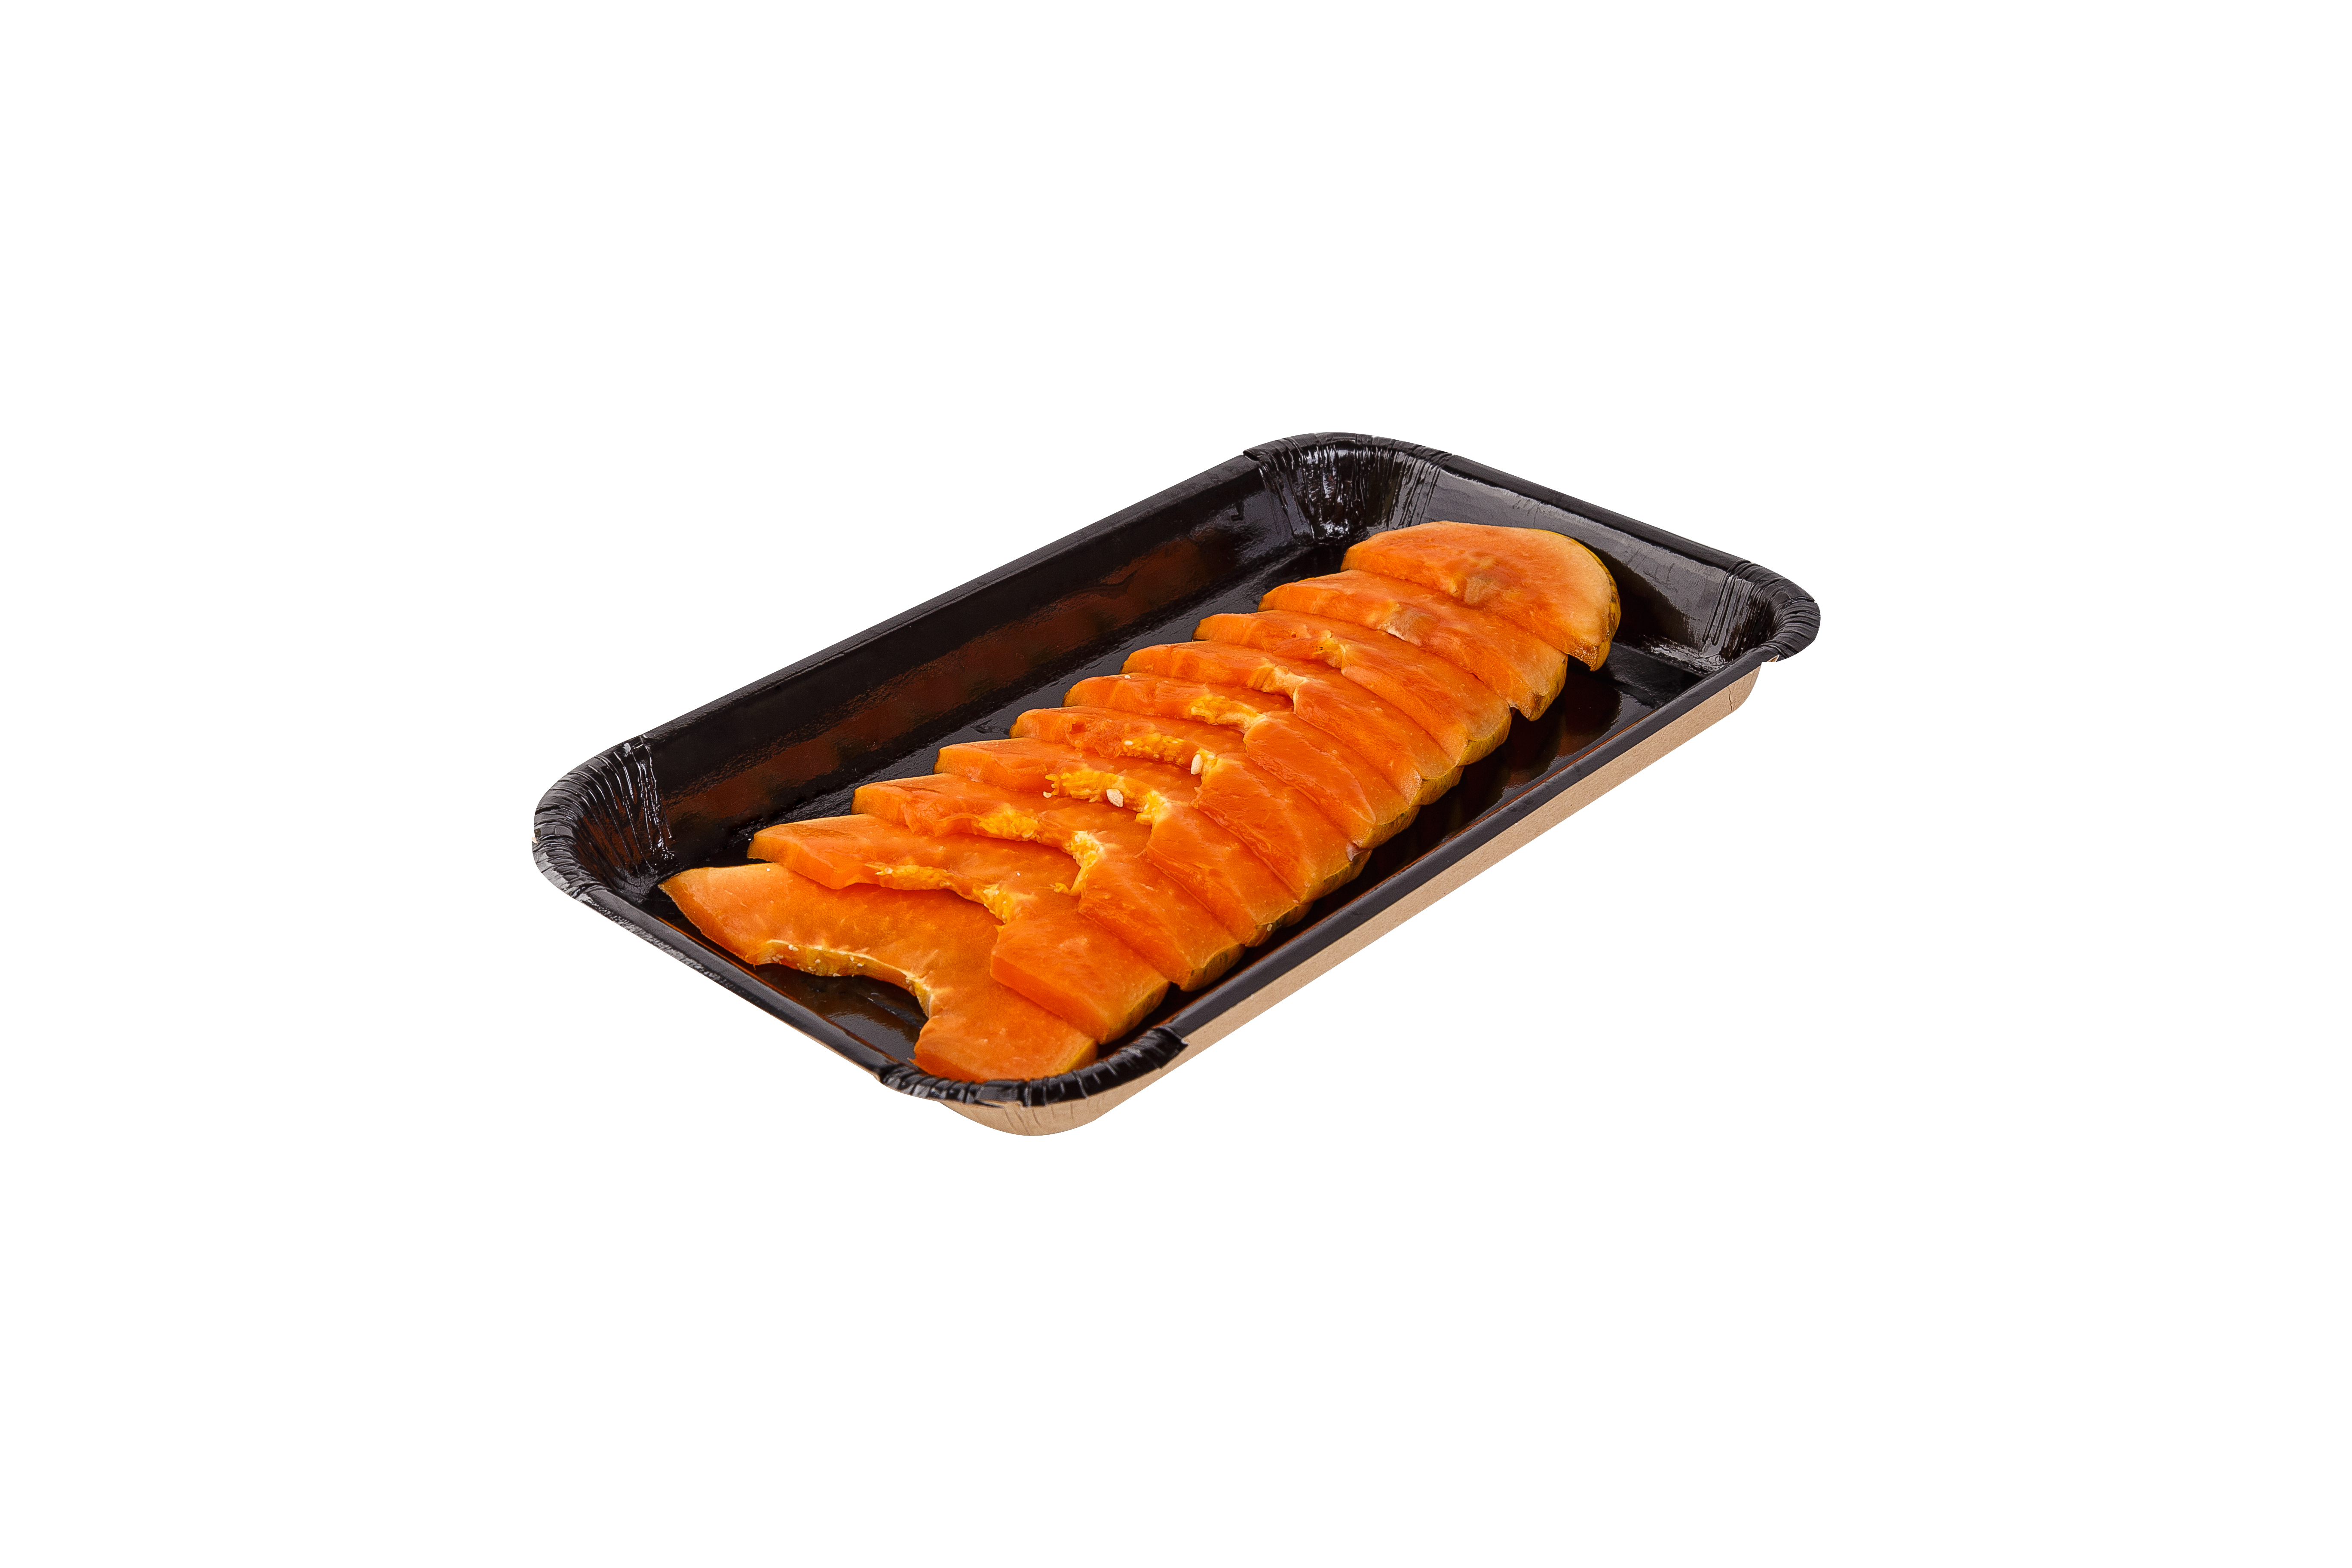 OSQ PLATTER 400 Black Edition tray for cooking, serving and packing cuts, vegetables